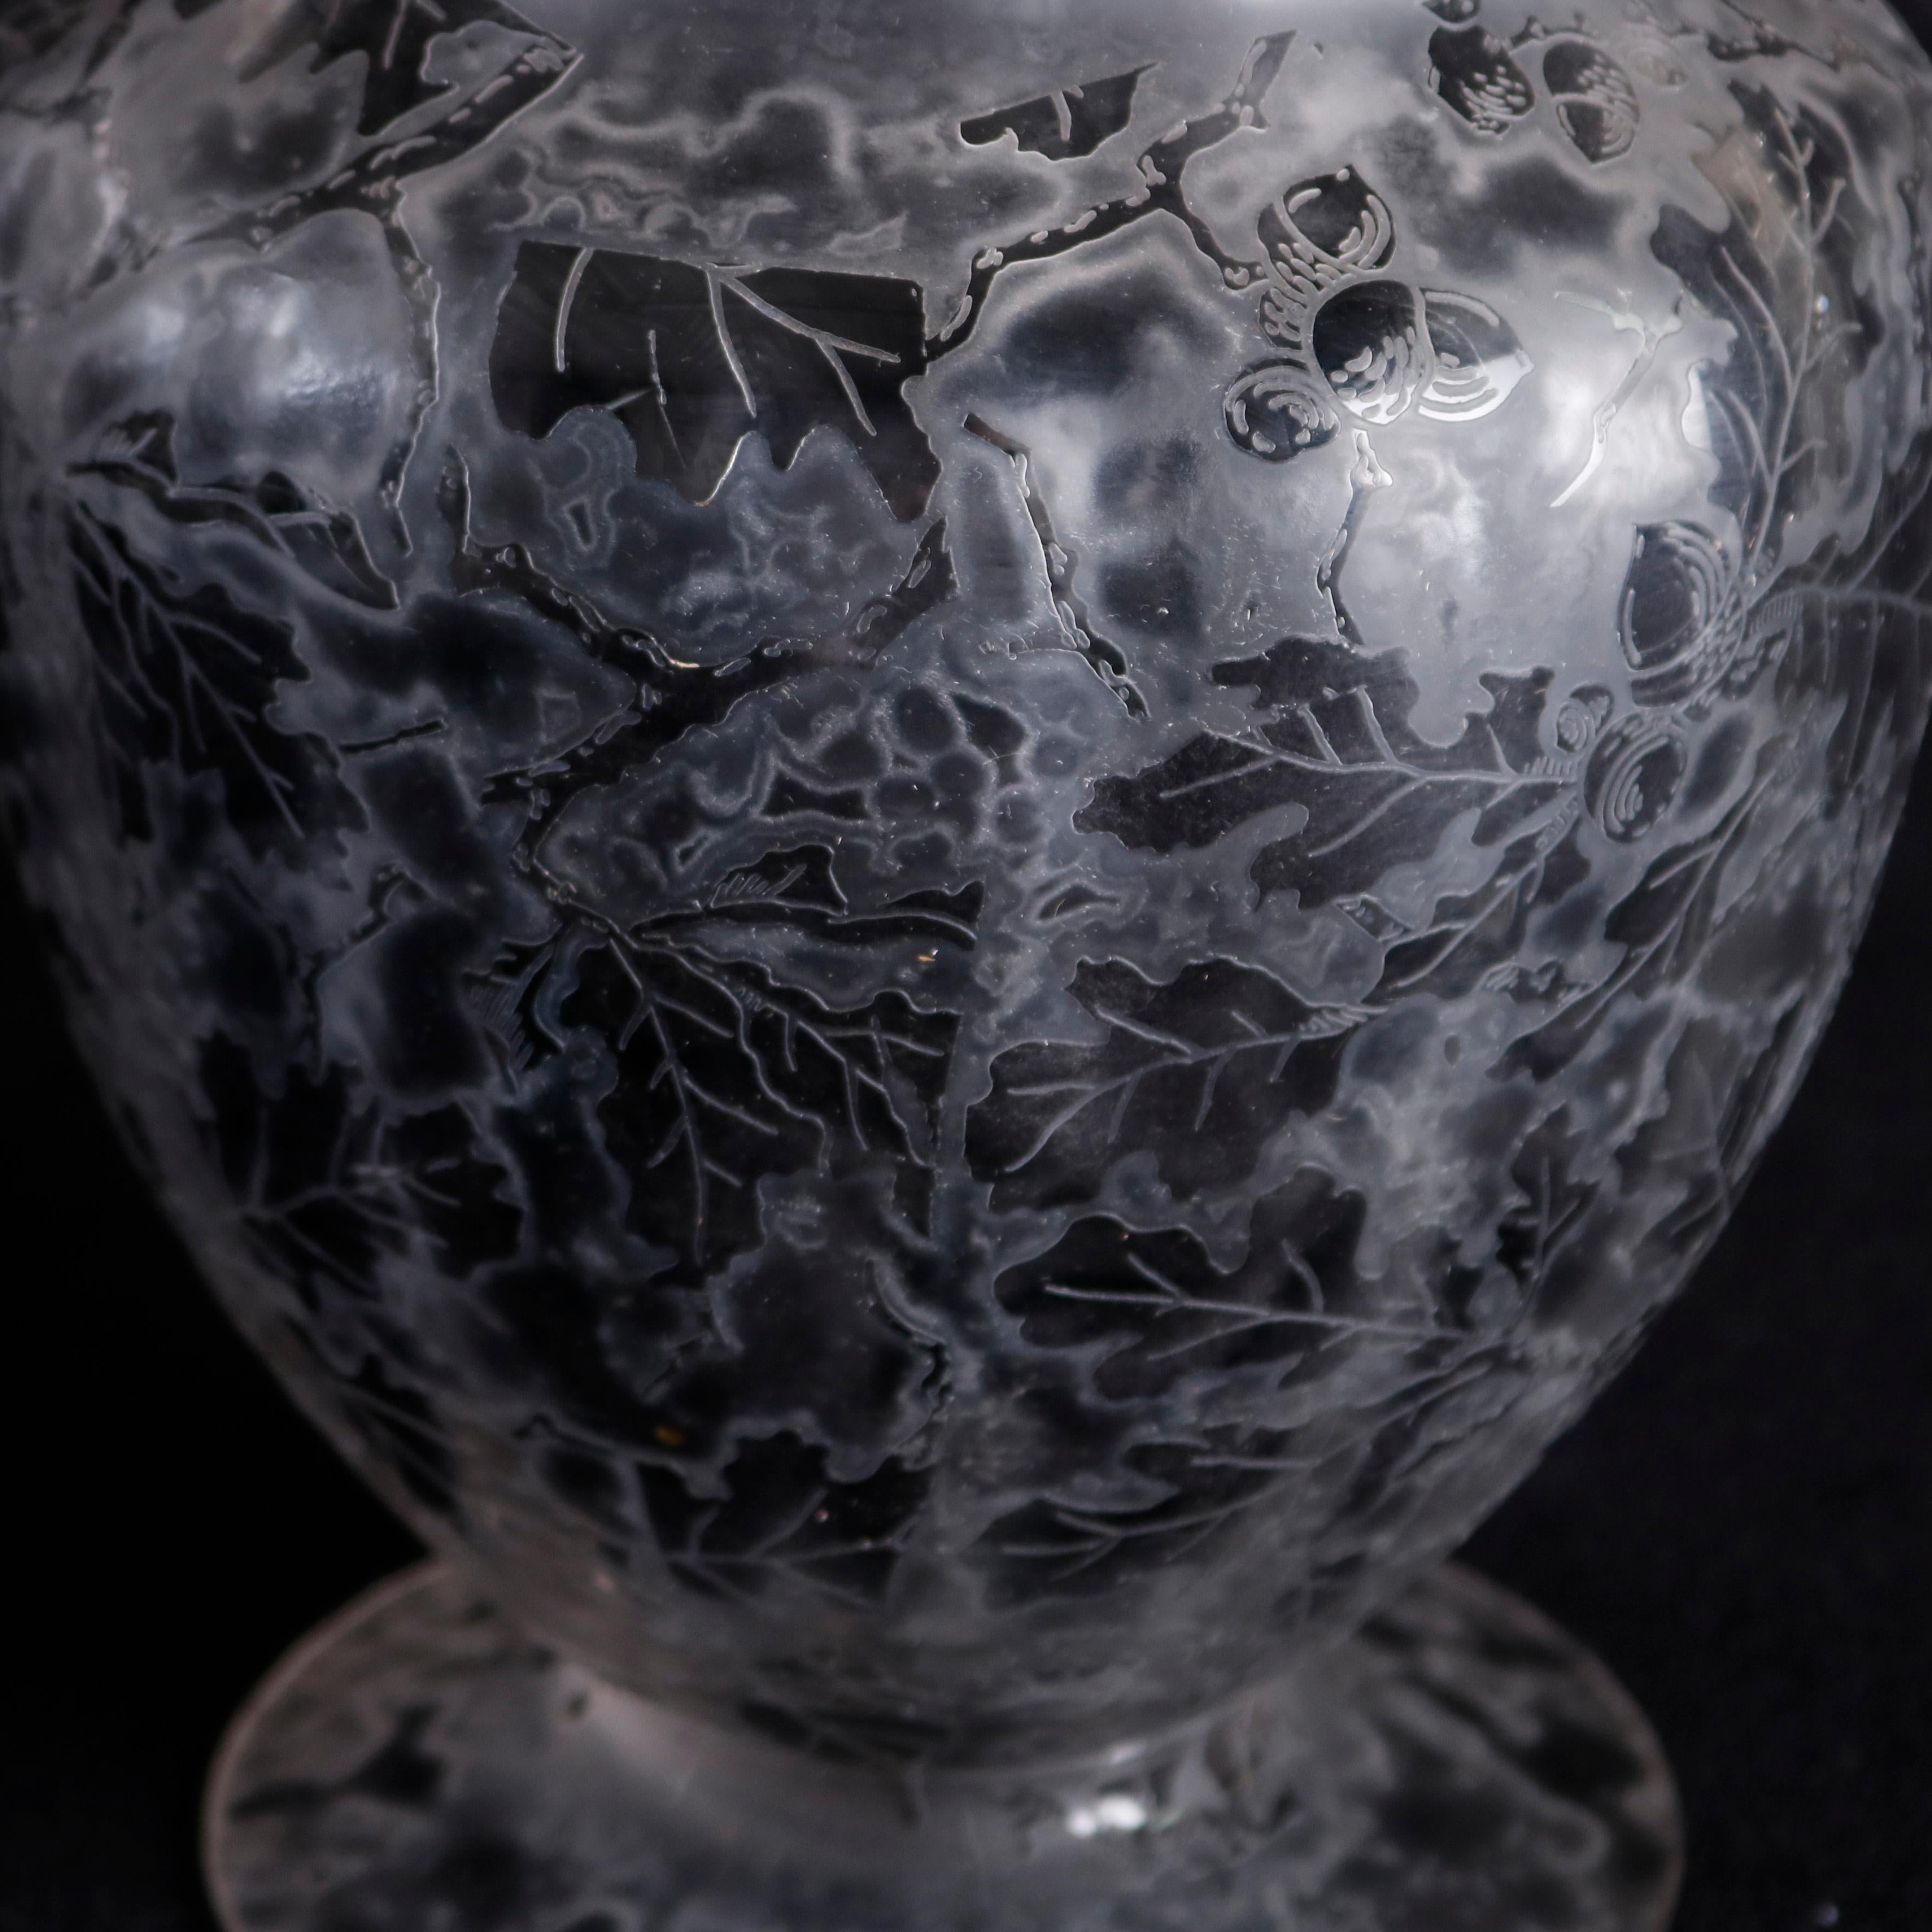 American Antique Fostoria Acid Etched Floral Art Glass Footed Vase, 20th Century For Sale